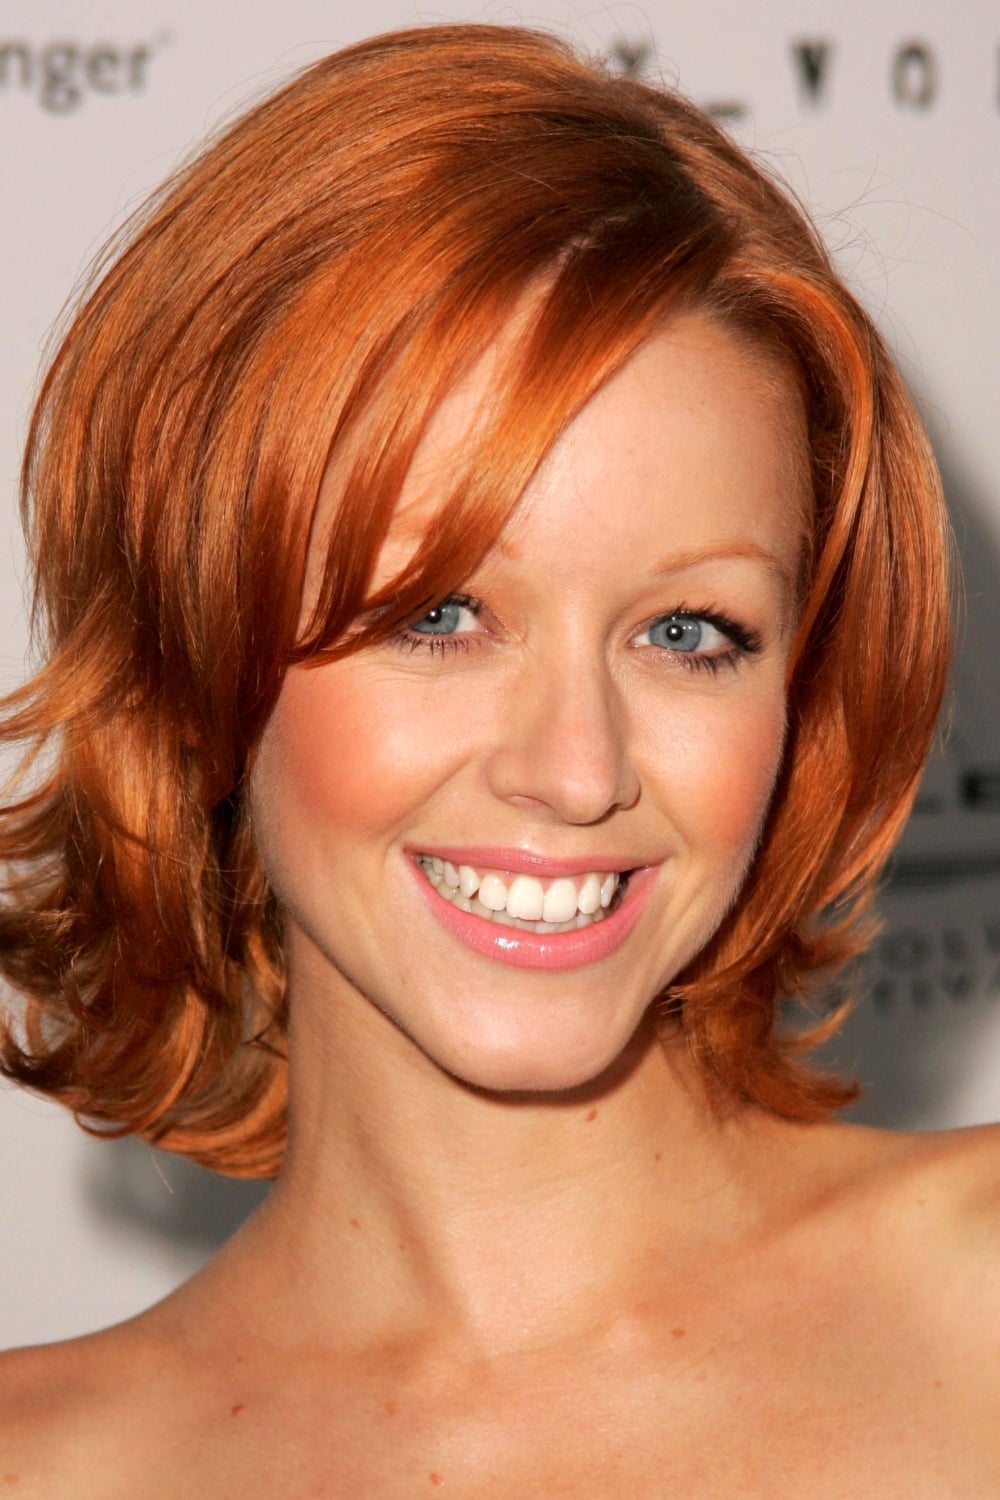 Butt lindy booth Lindy Booth